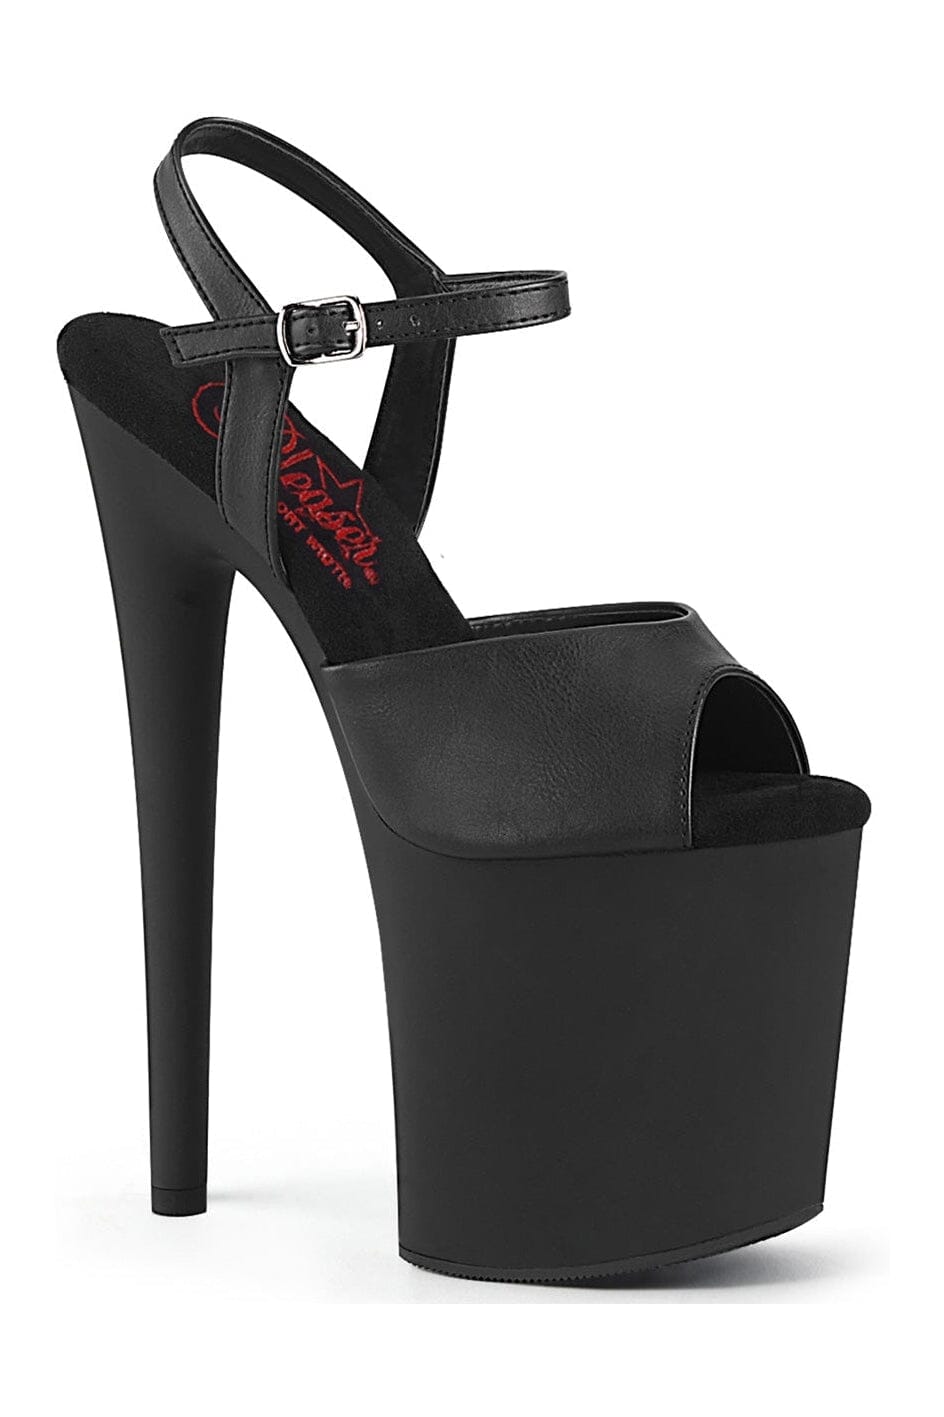 NAUGHTY-809 Black Faux Leather Sandal-Sandals-Pleaser-Black-10-Faux Leather-SEXYSHOES.COM